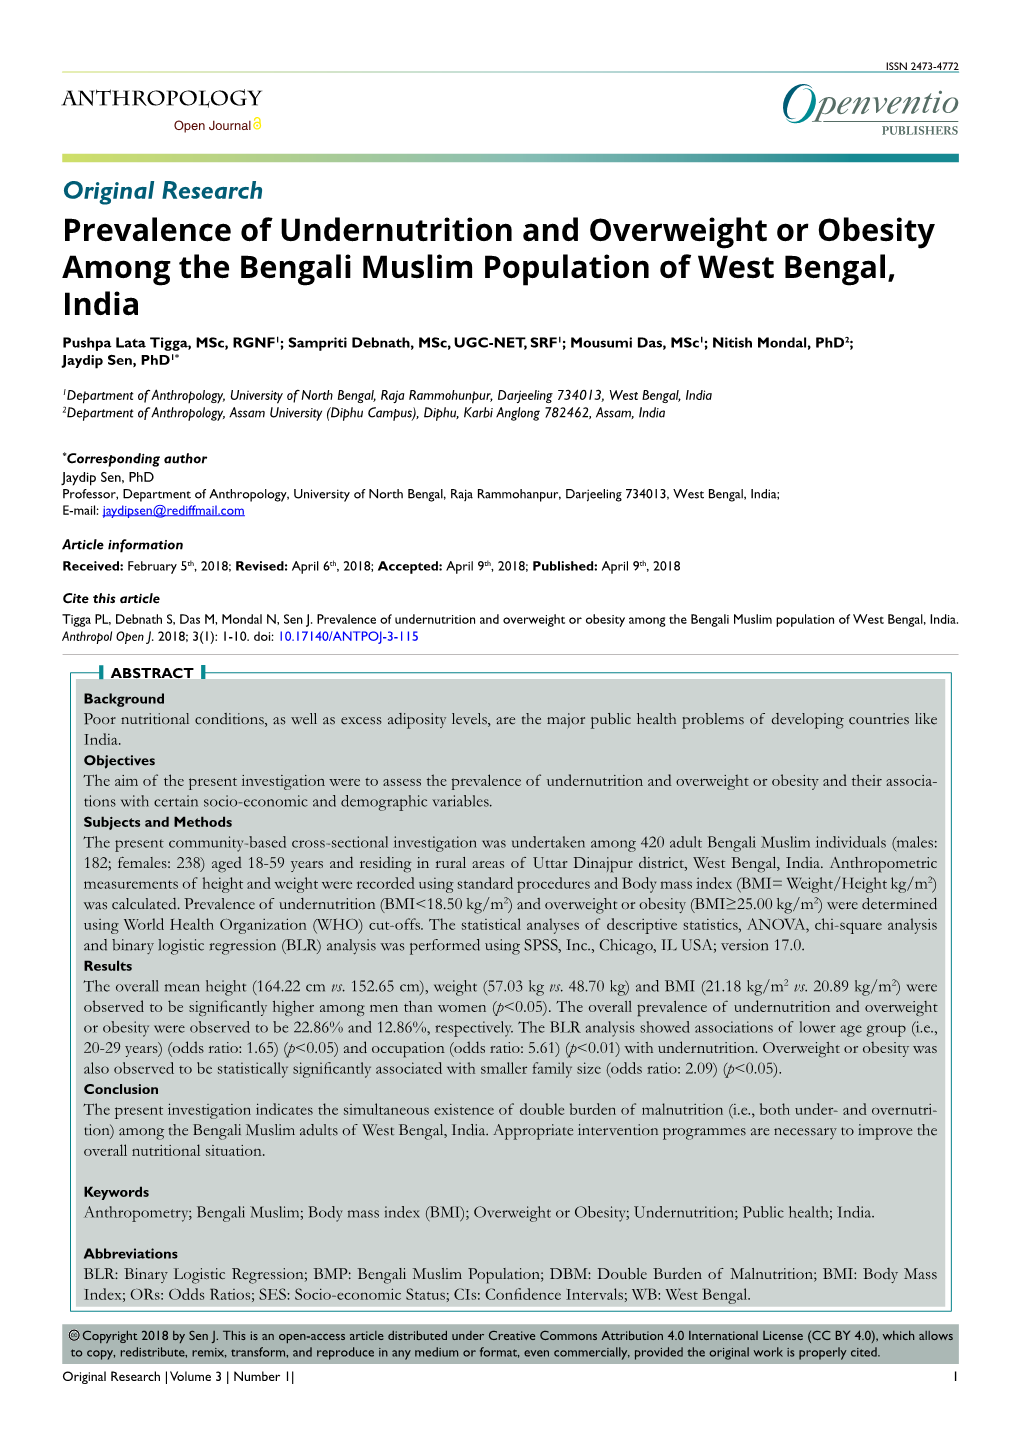 Prevalence of Undernutrition and Overweight Or Obesity Among the Bengali Muslim Population of West Bengal, India